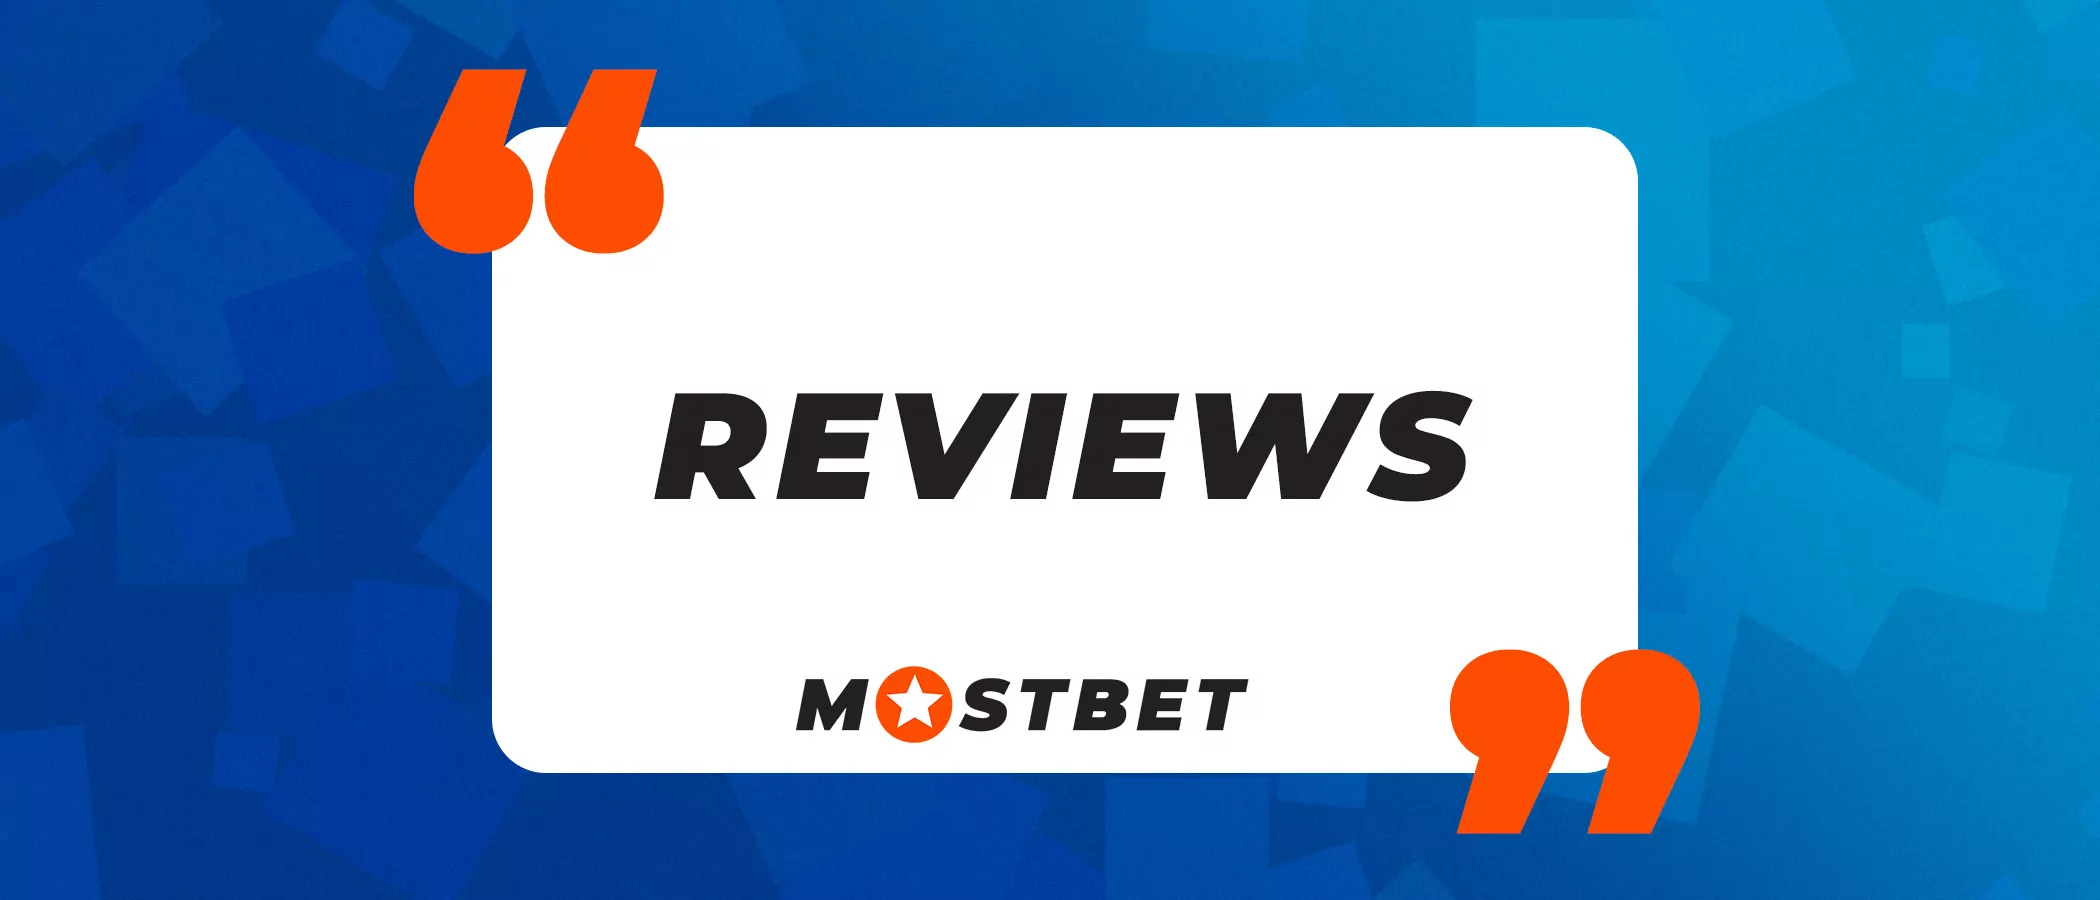 Mostbet player reviews.